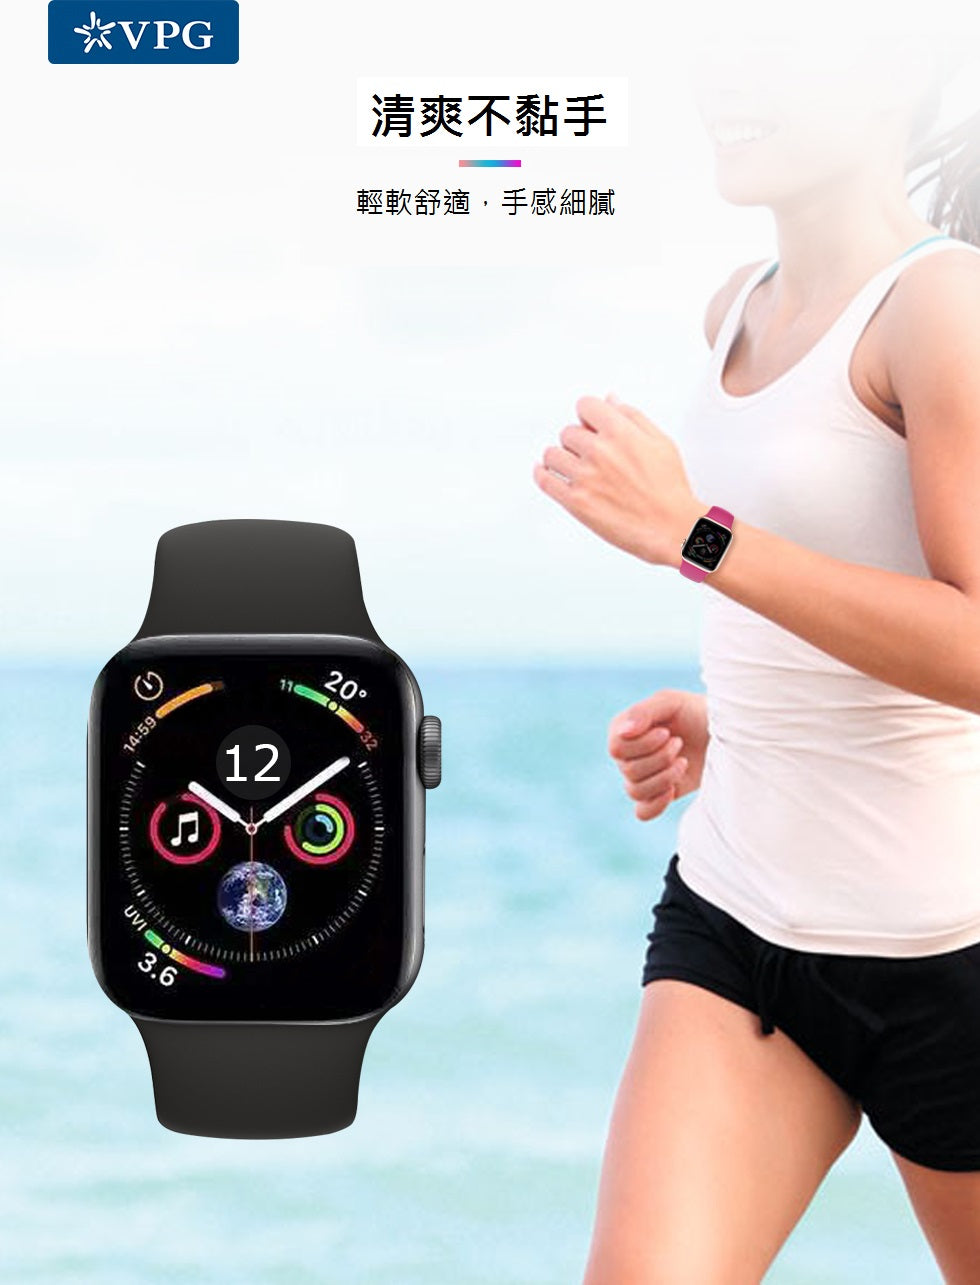 VPG Silicone Sport Band for Apple Watch 1/2/3/4/5/6/7/8/SE/Ultra Themis Series (3 Colors)